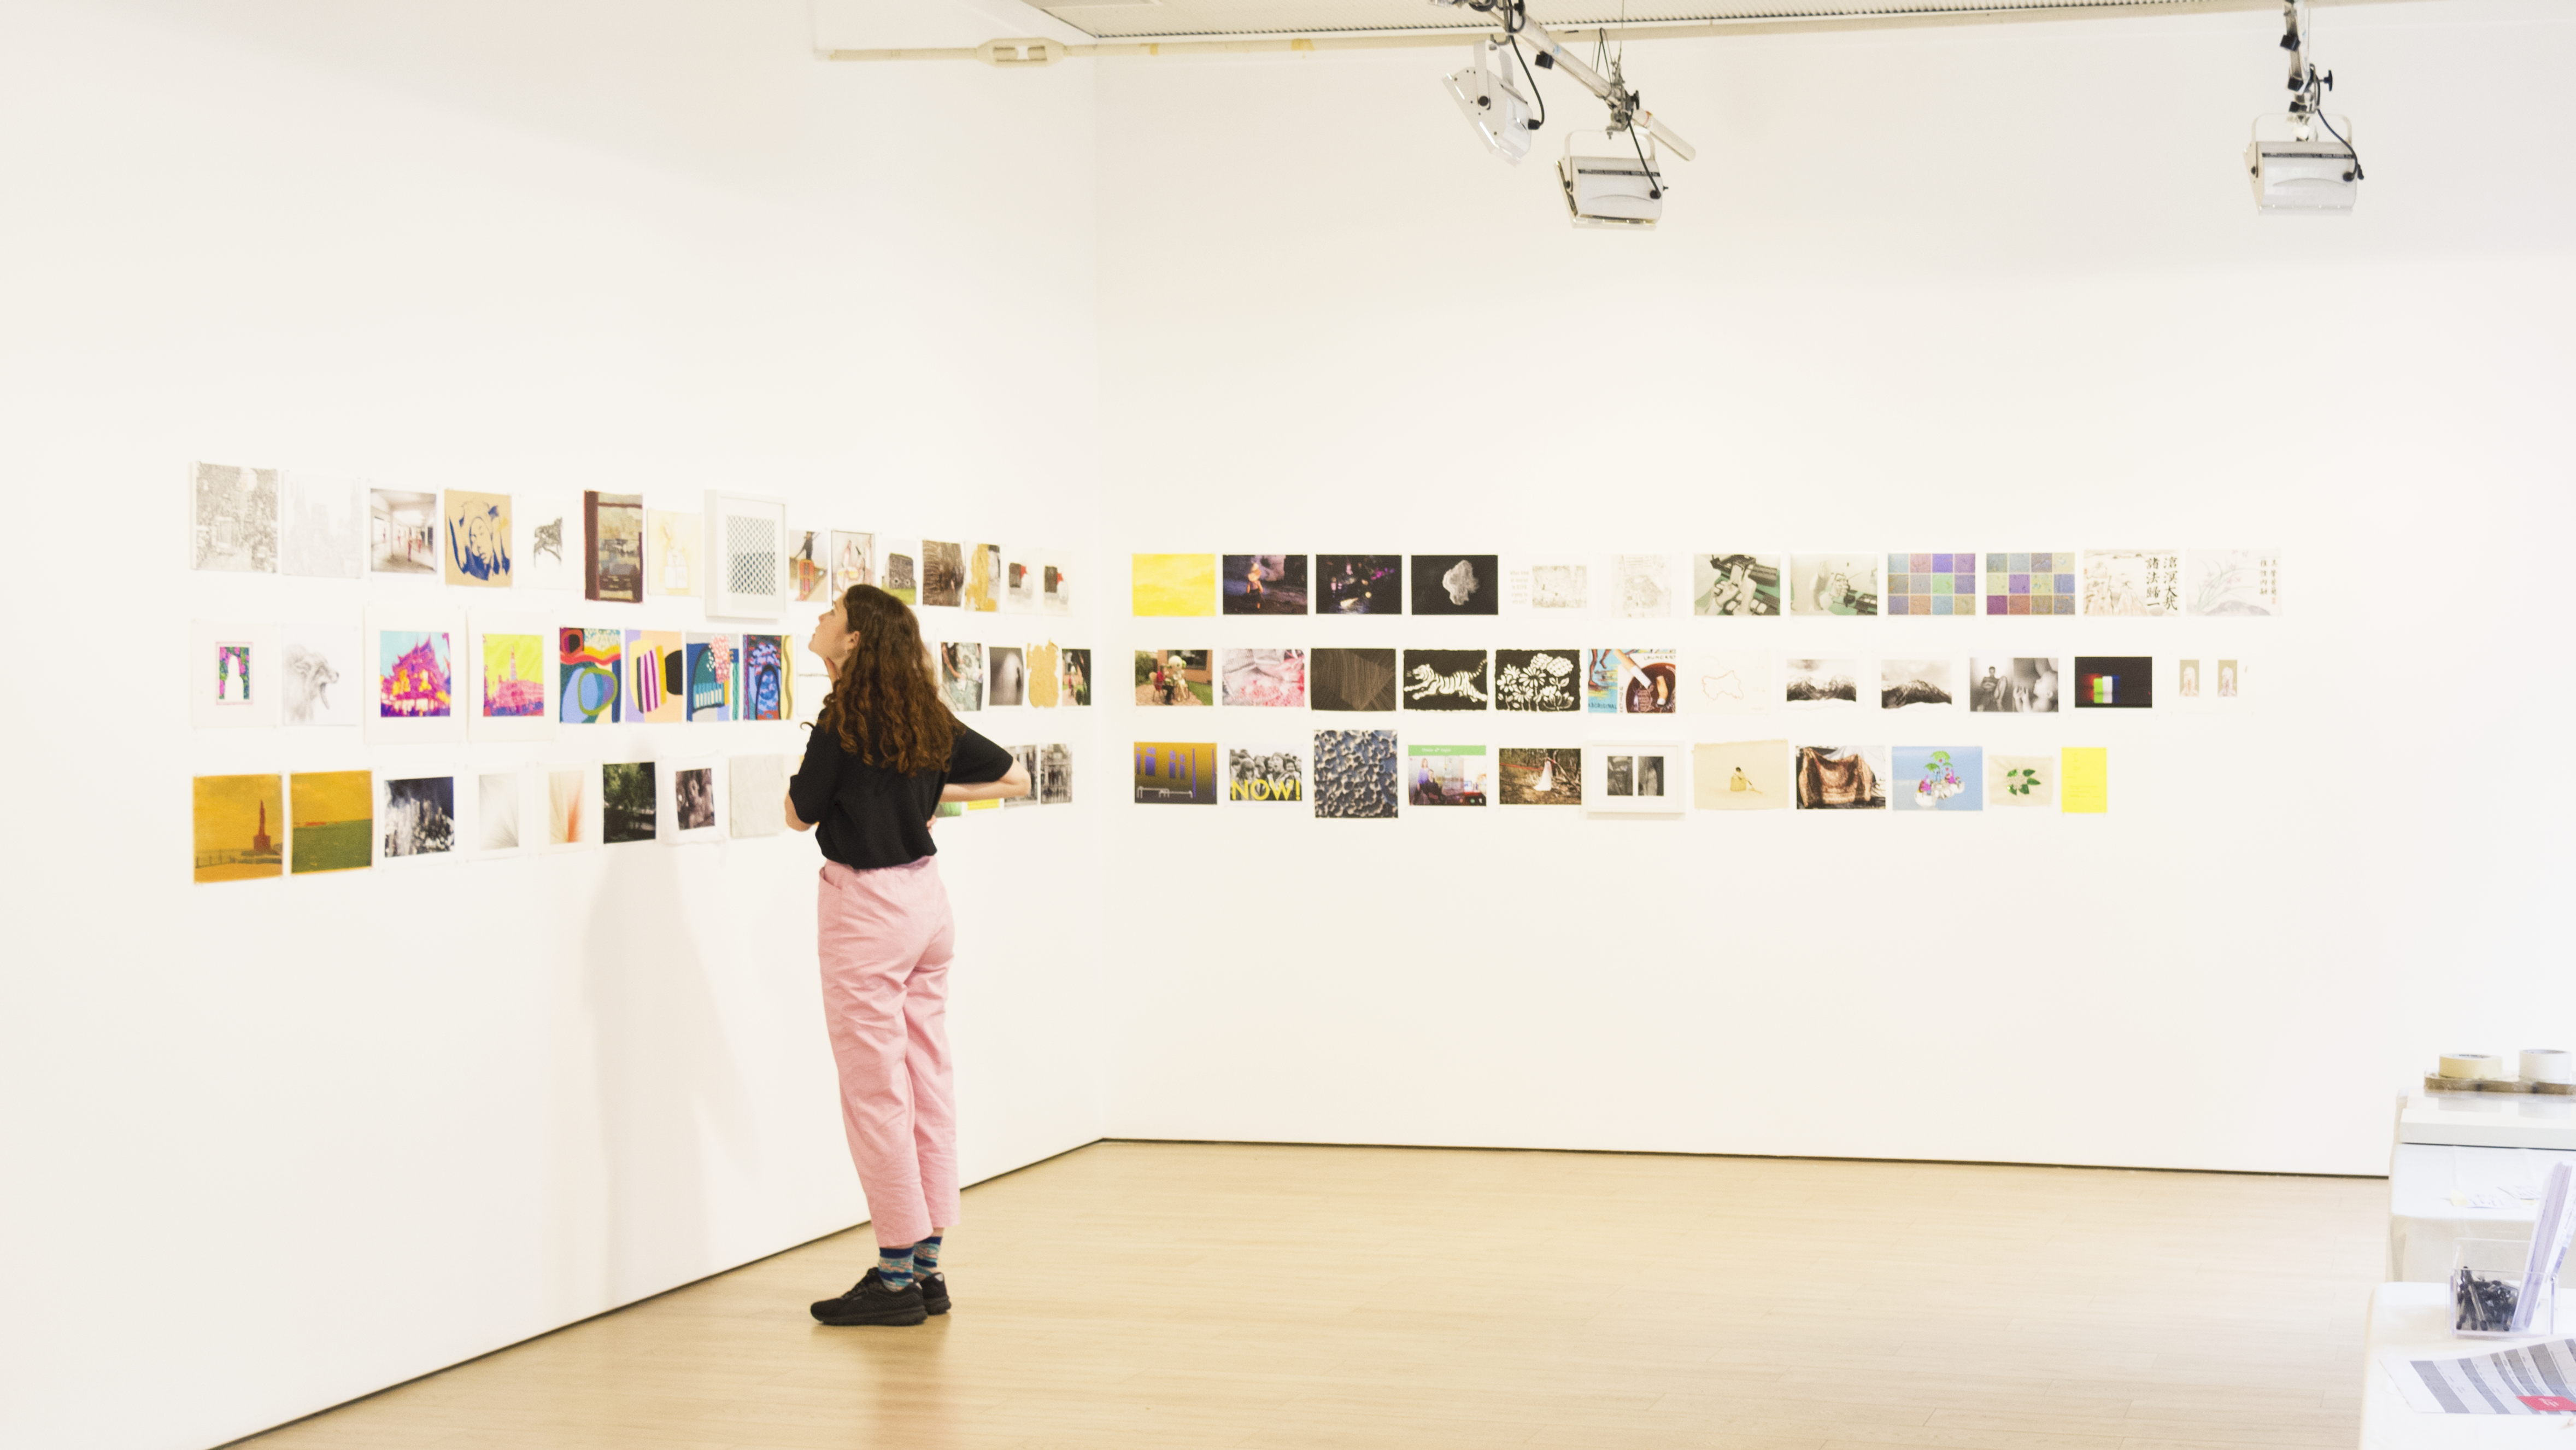 A woman with curly brown hair, wearing a black t-shirt, baby pink pants and black sneakers stands in an empty gallery, looking at a wall of A4-sized illustrations, paintings and designs.